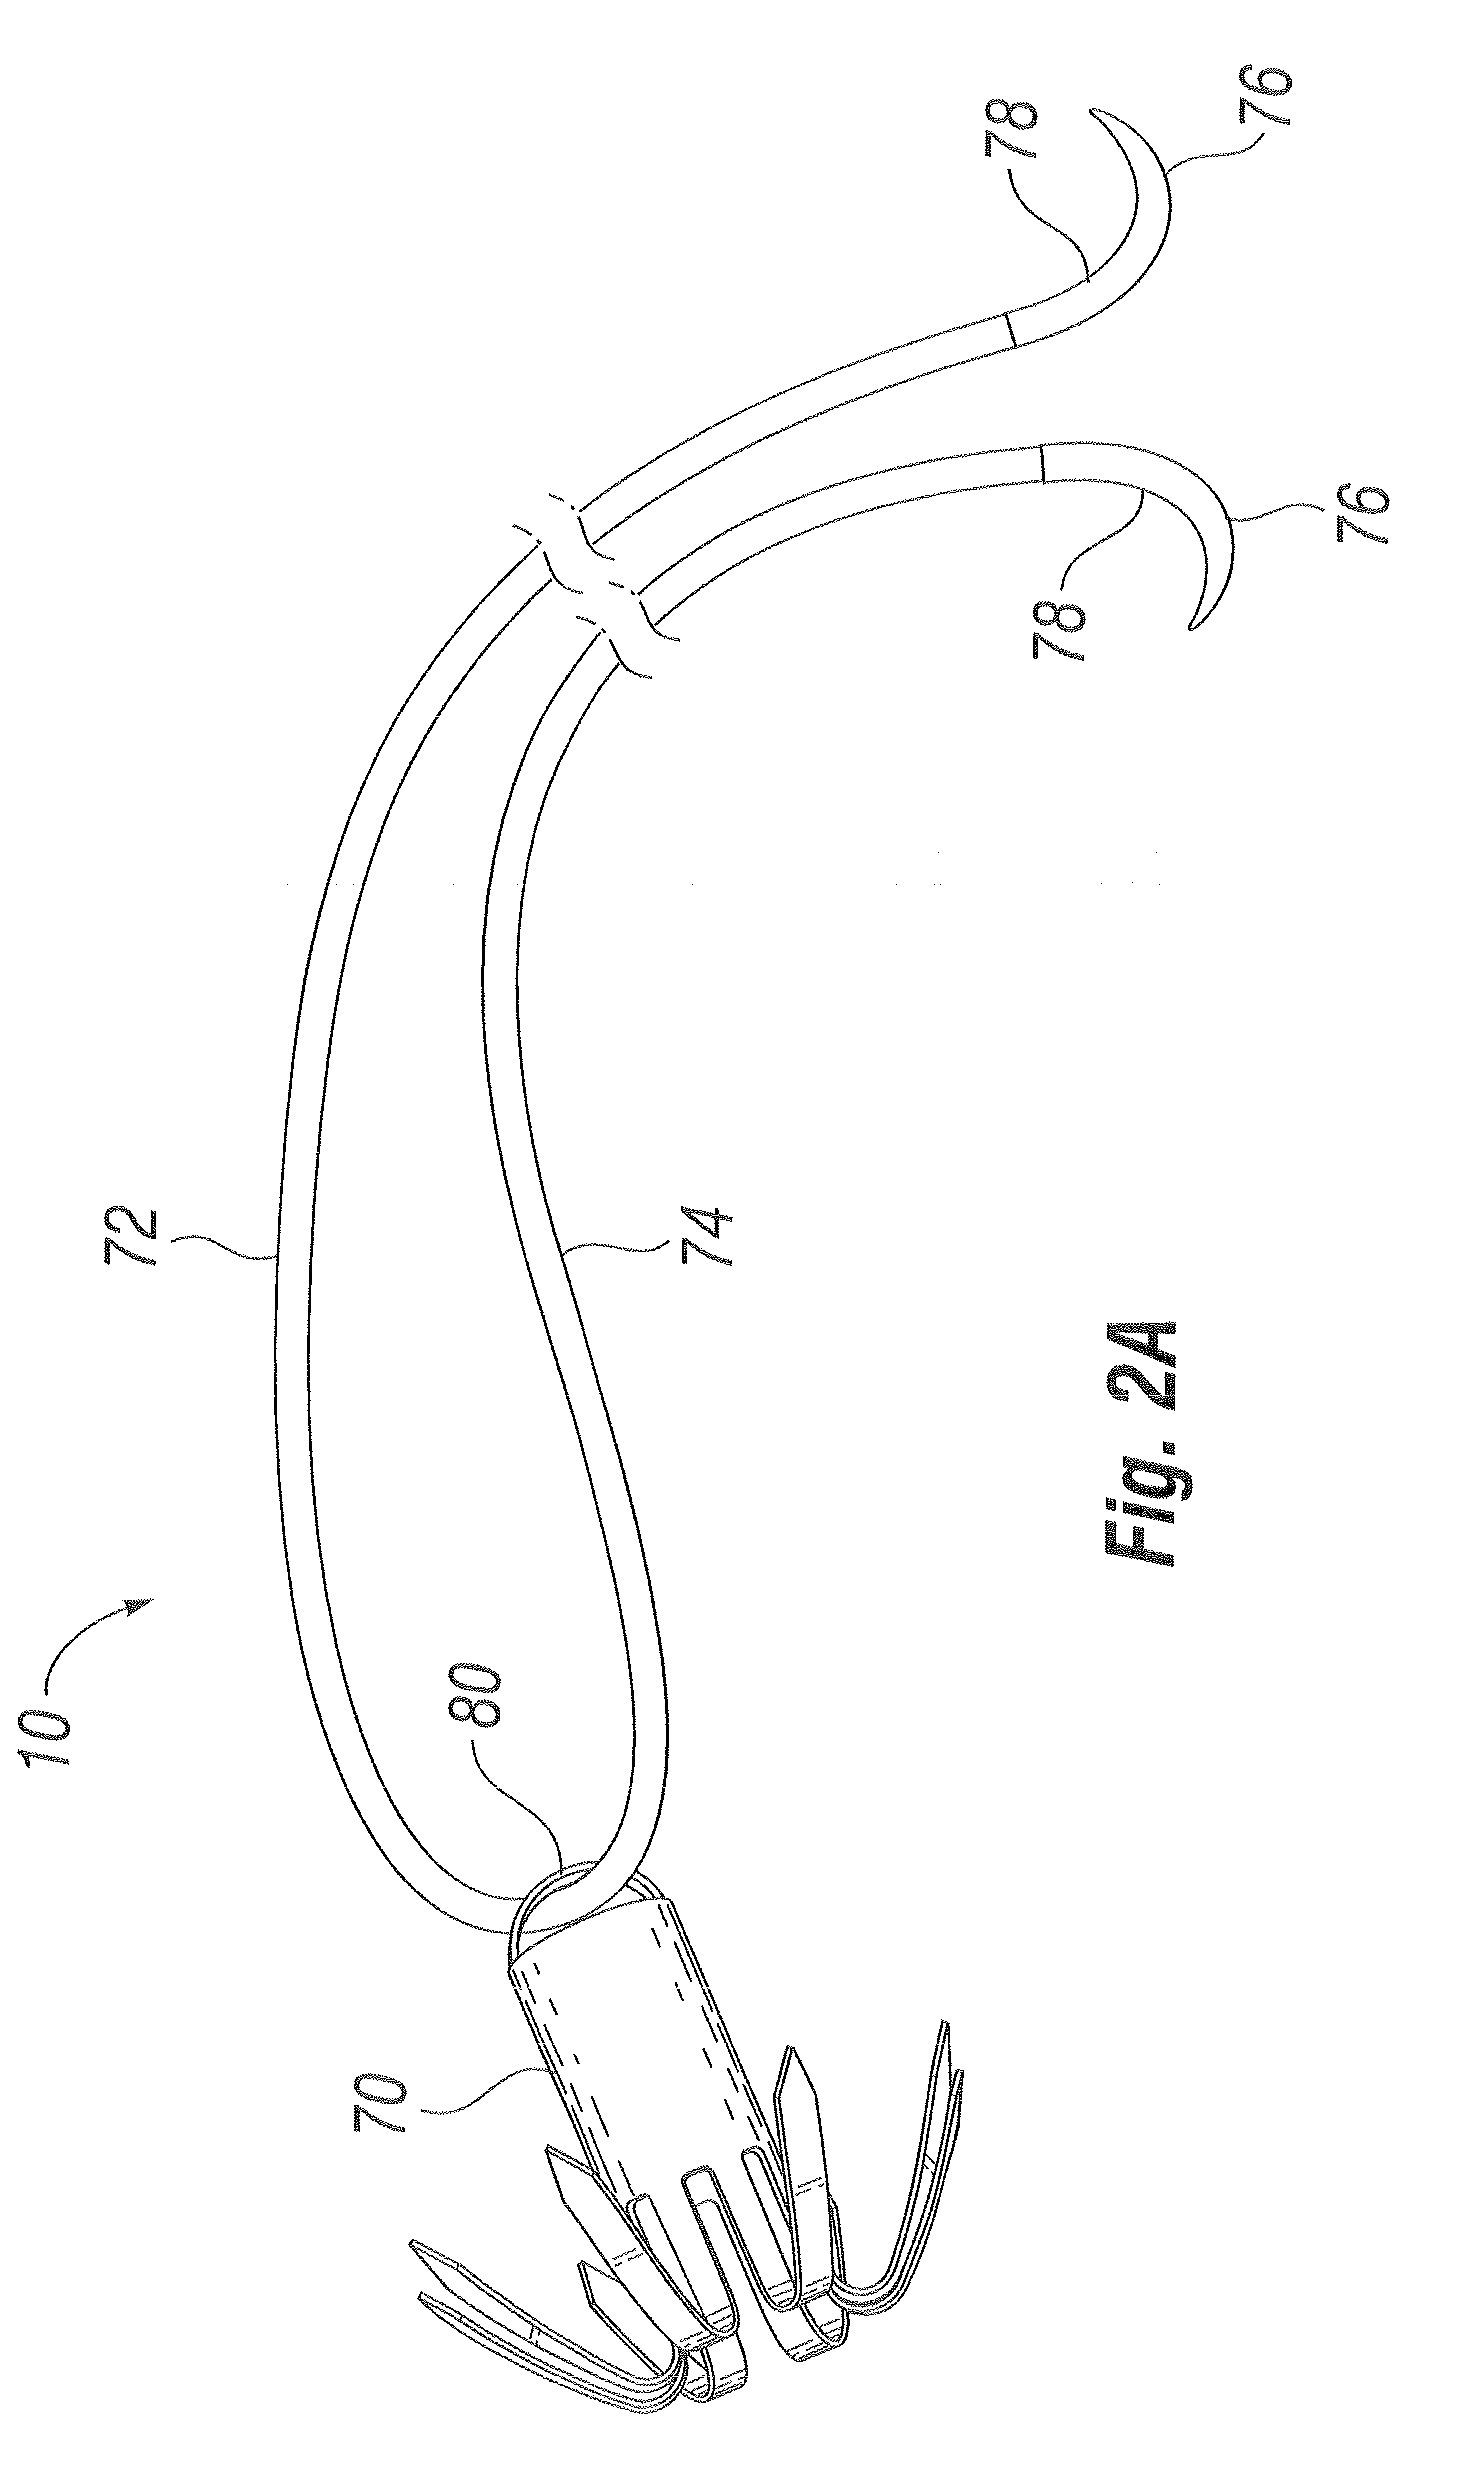 Suture and method for repairing a heart